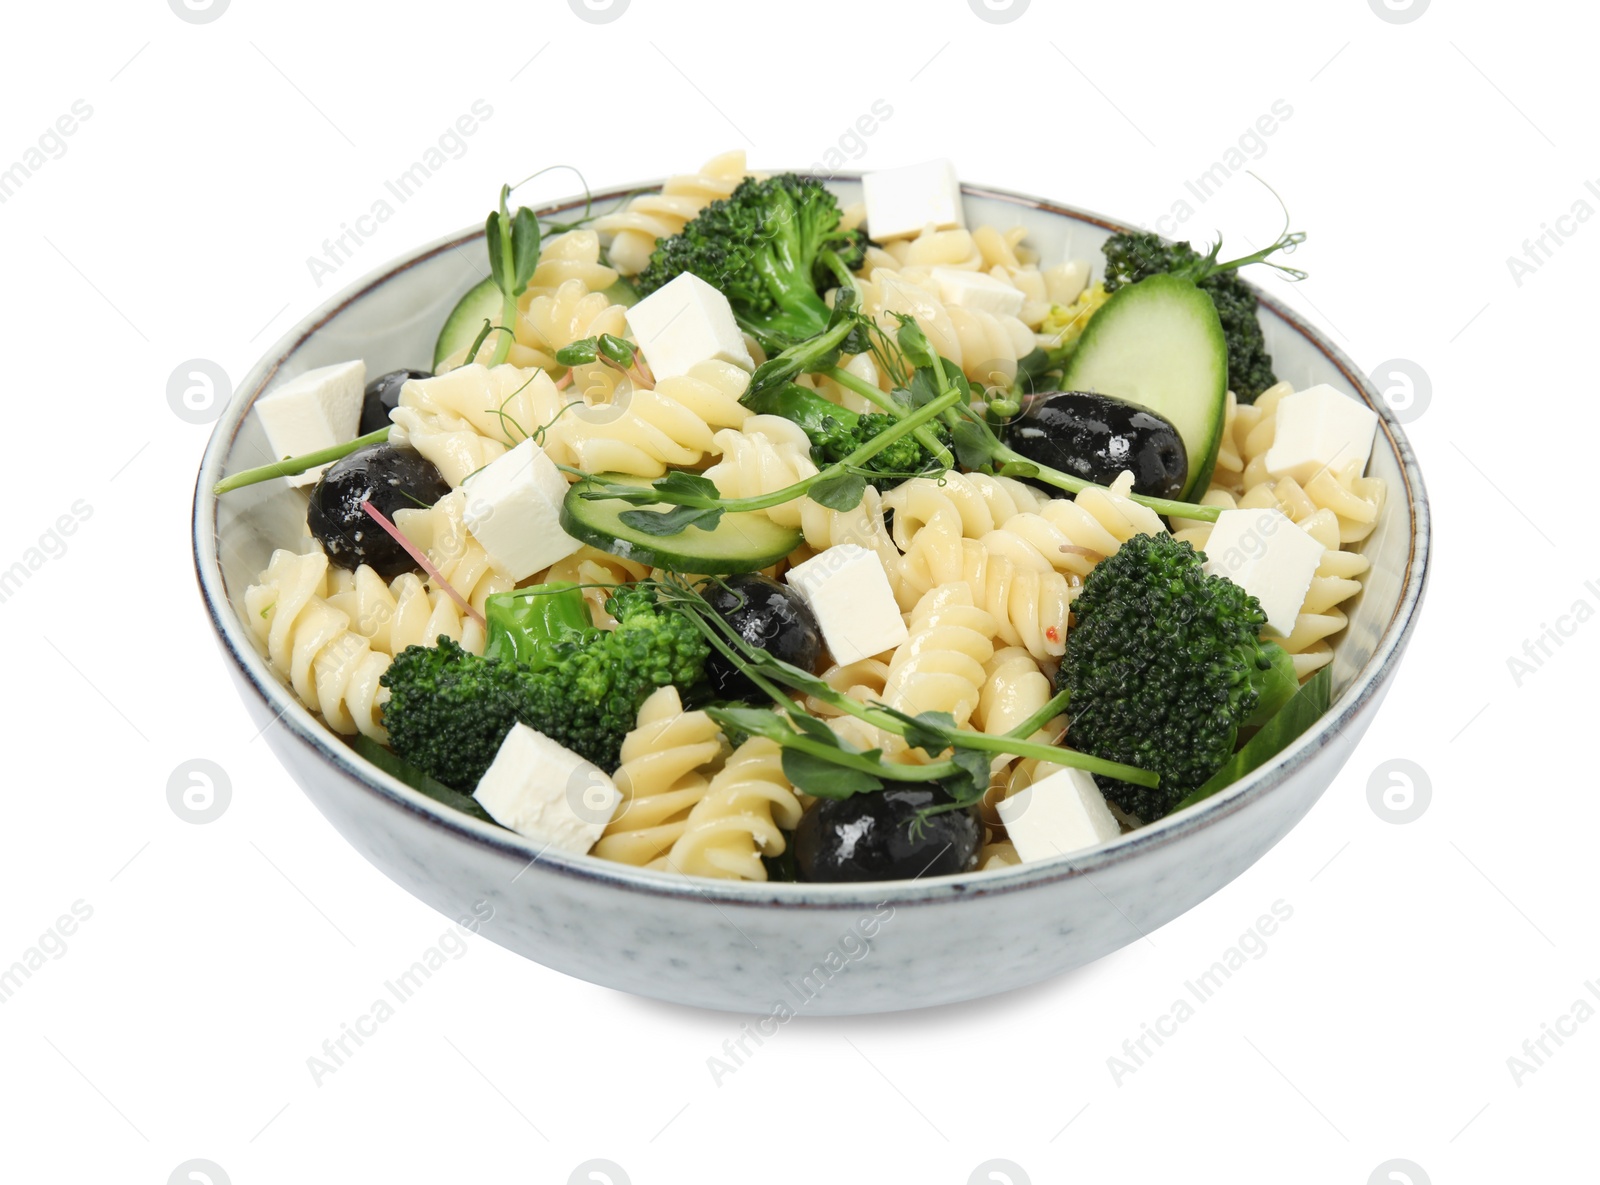 Photo of Bowl of delicious pasta with cucumber, olives, broccoli and cheese on white background